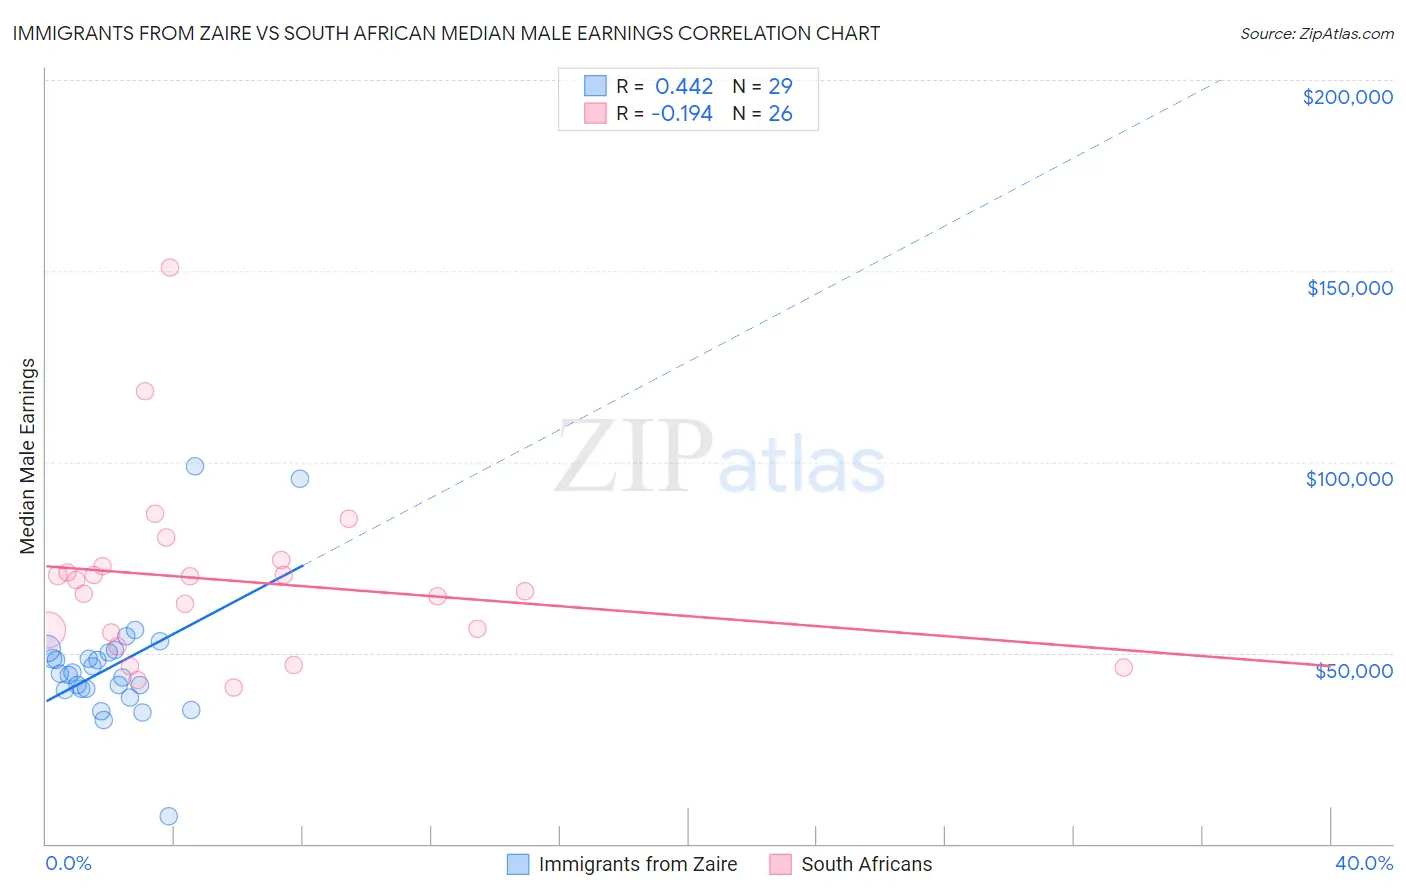 Immigrants from Zaire vs South African Median Male Earnings